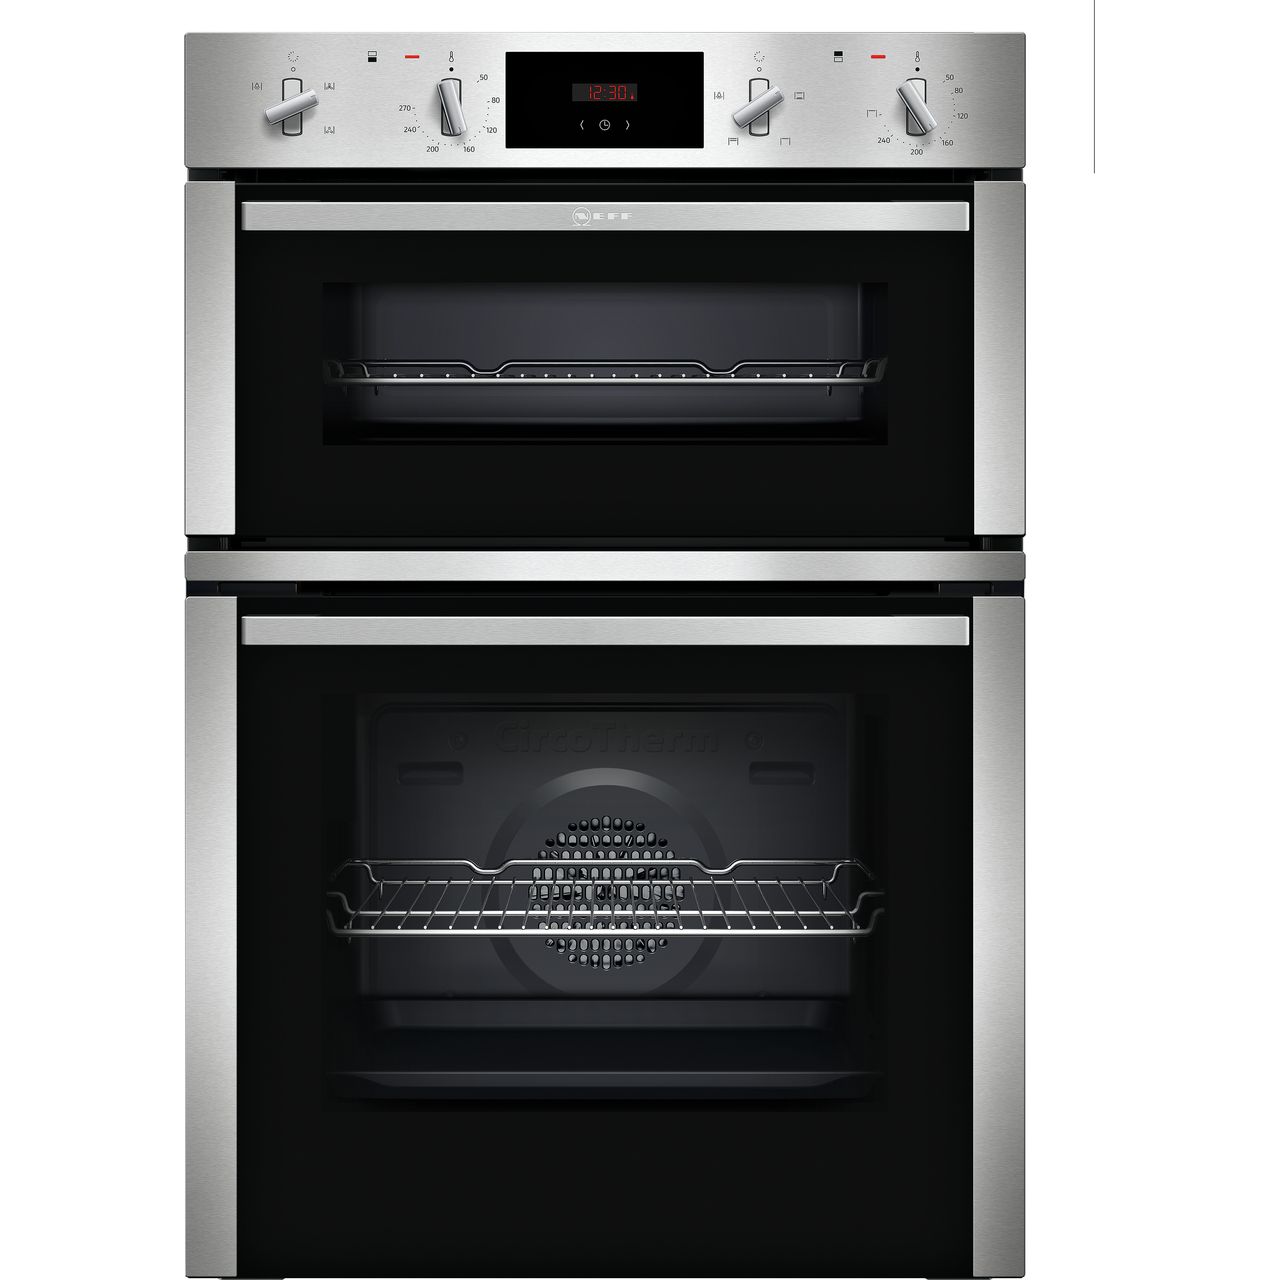 NEFF N30 U1CHC0AN0B Built In Double Oven Review